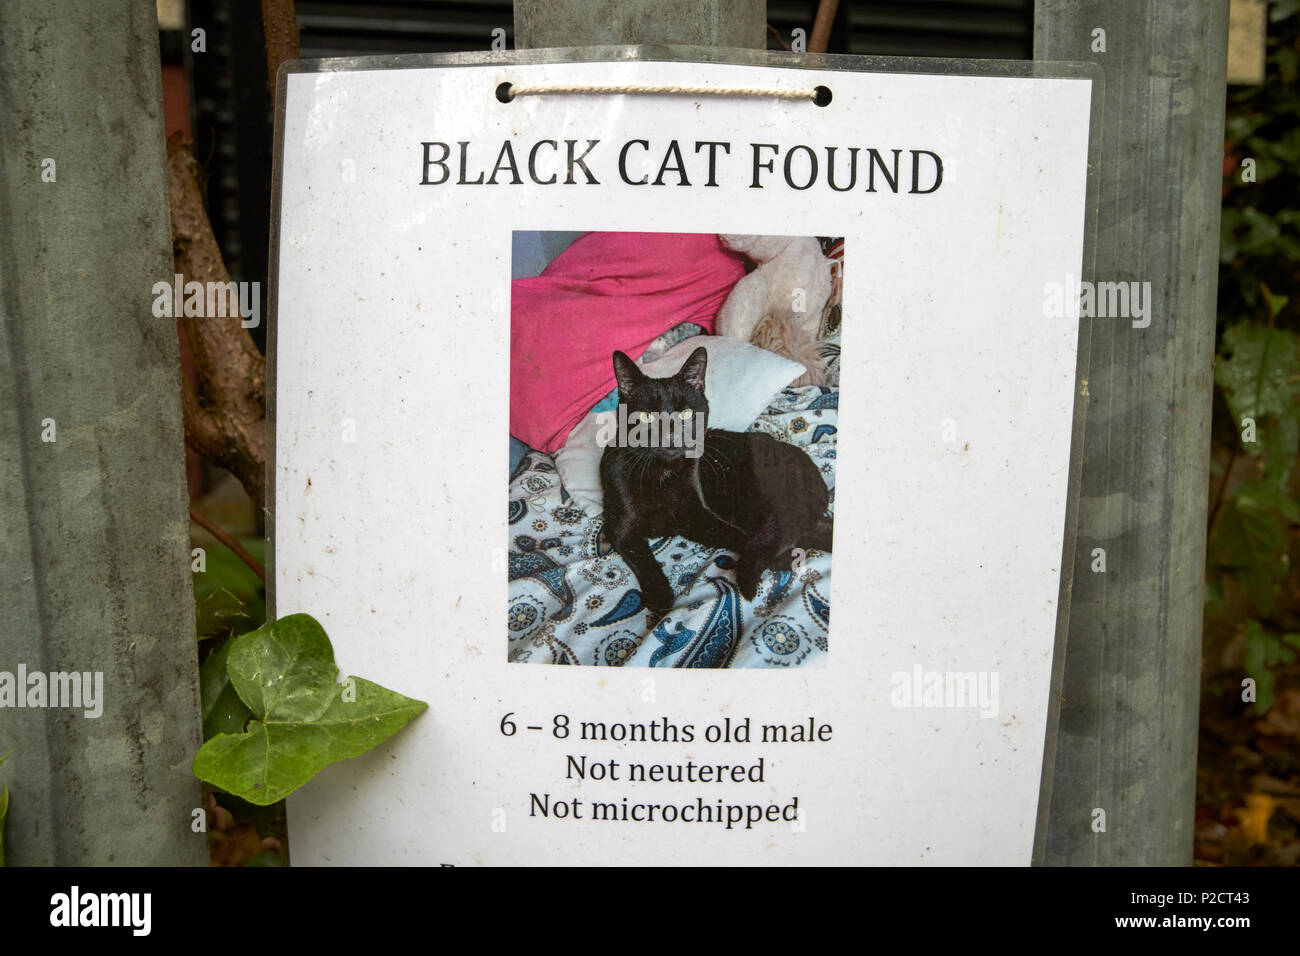 black cat found notice hung on railings in the uk Stock Photo